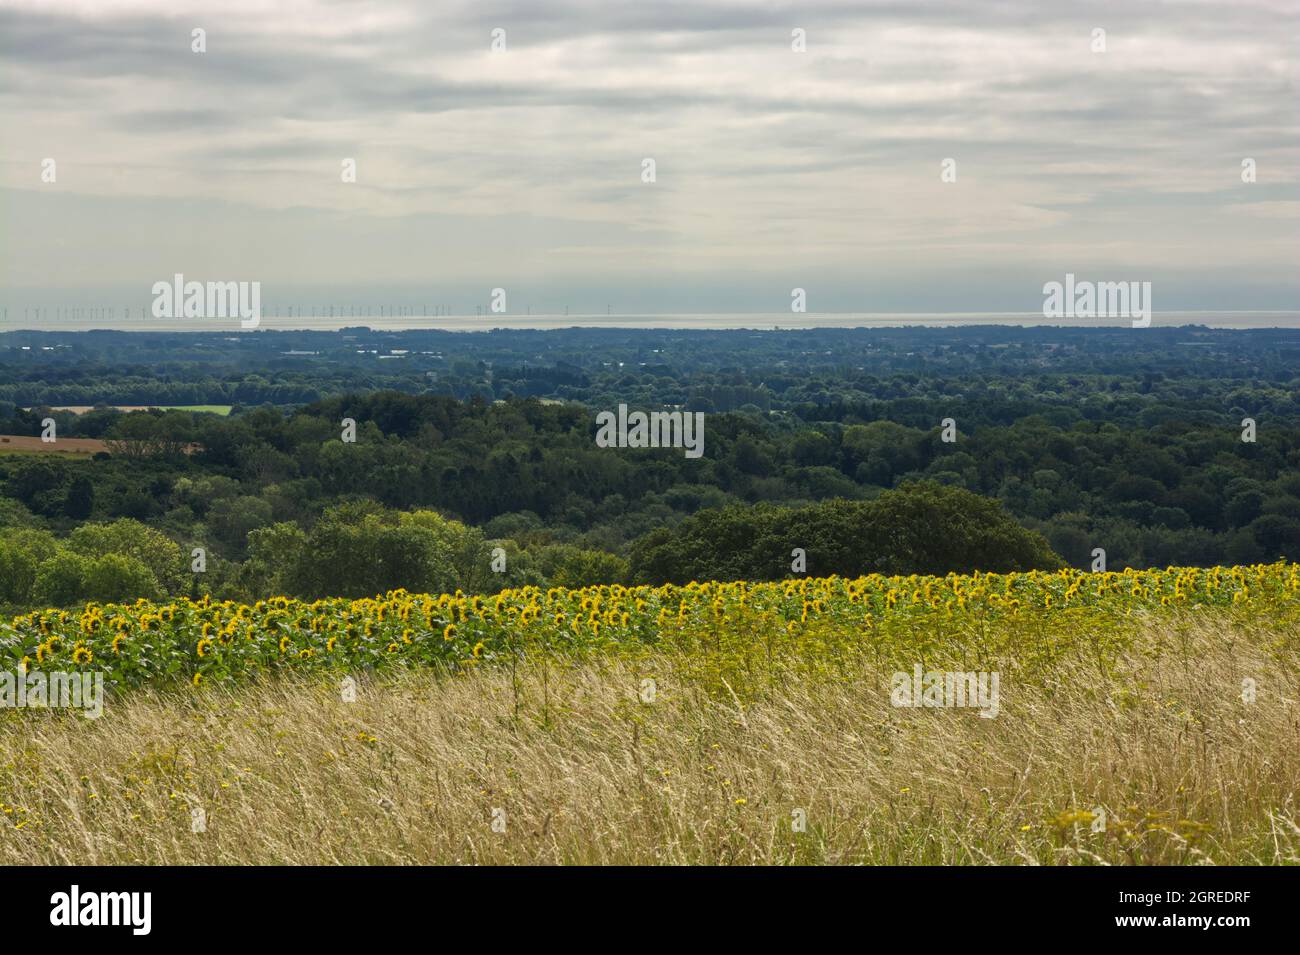 South Downs countryside at Halnaker near Chichester, West Sussex, England. With field of sunflowers in foreground and English Channel in distance Stock Photo